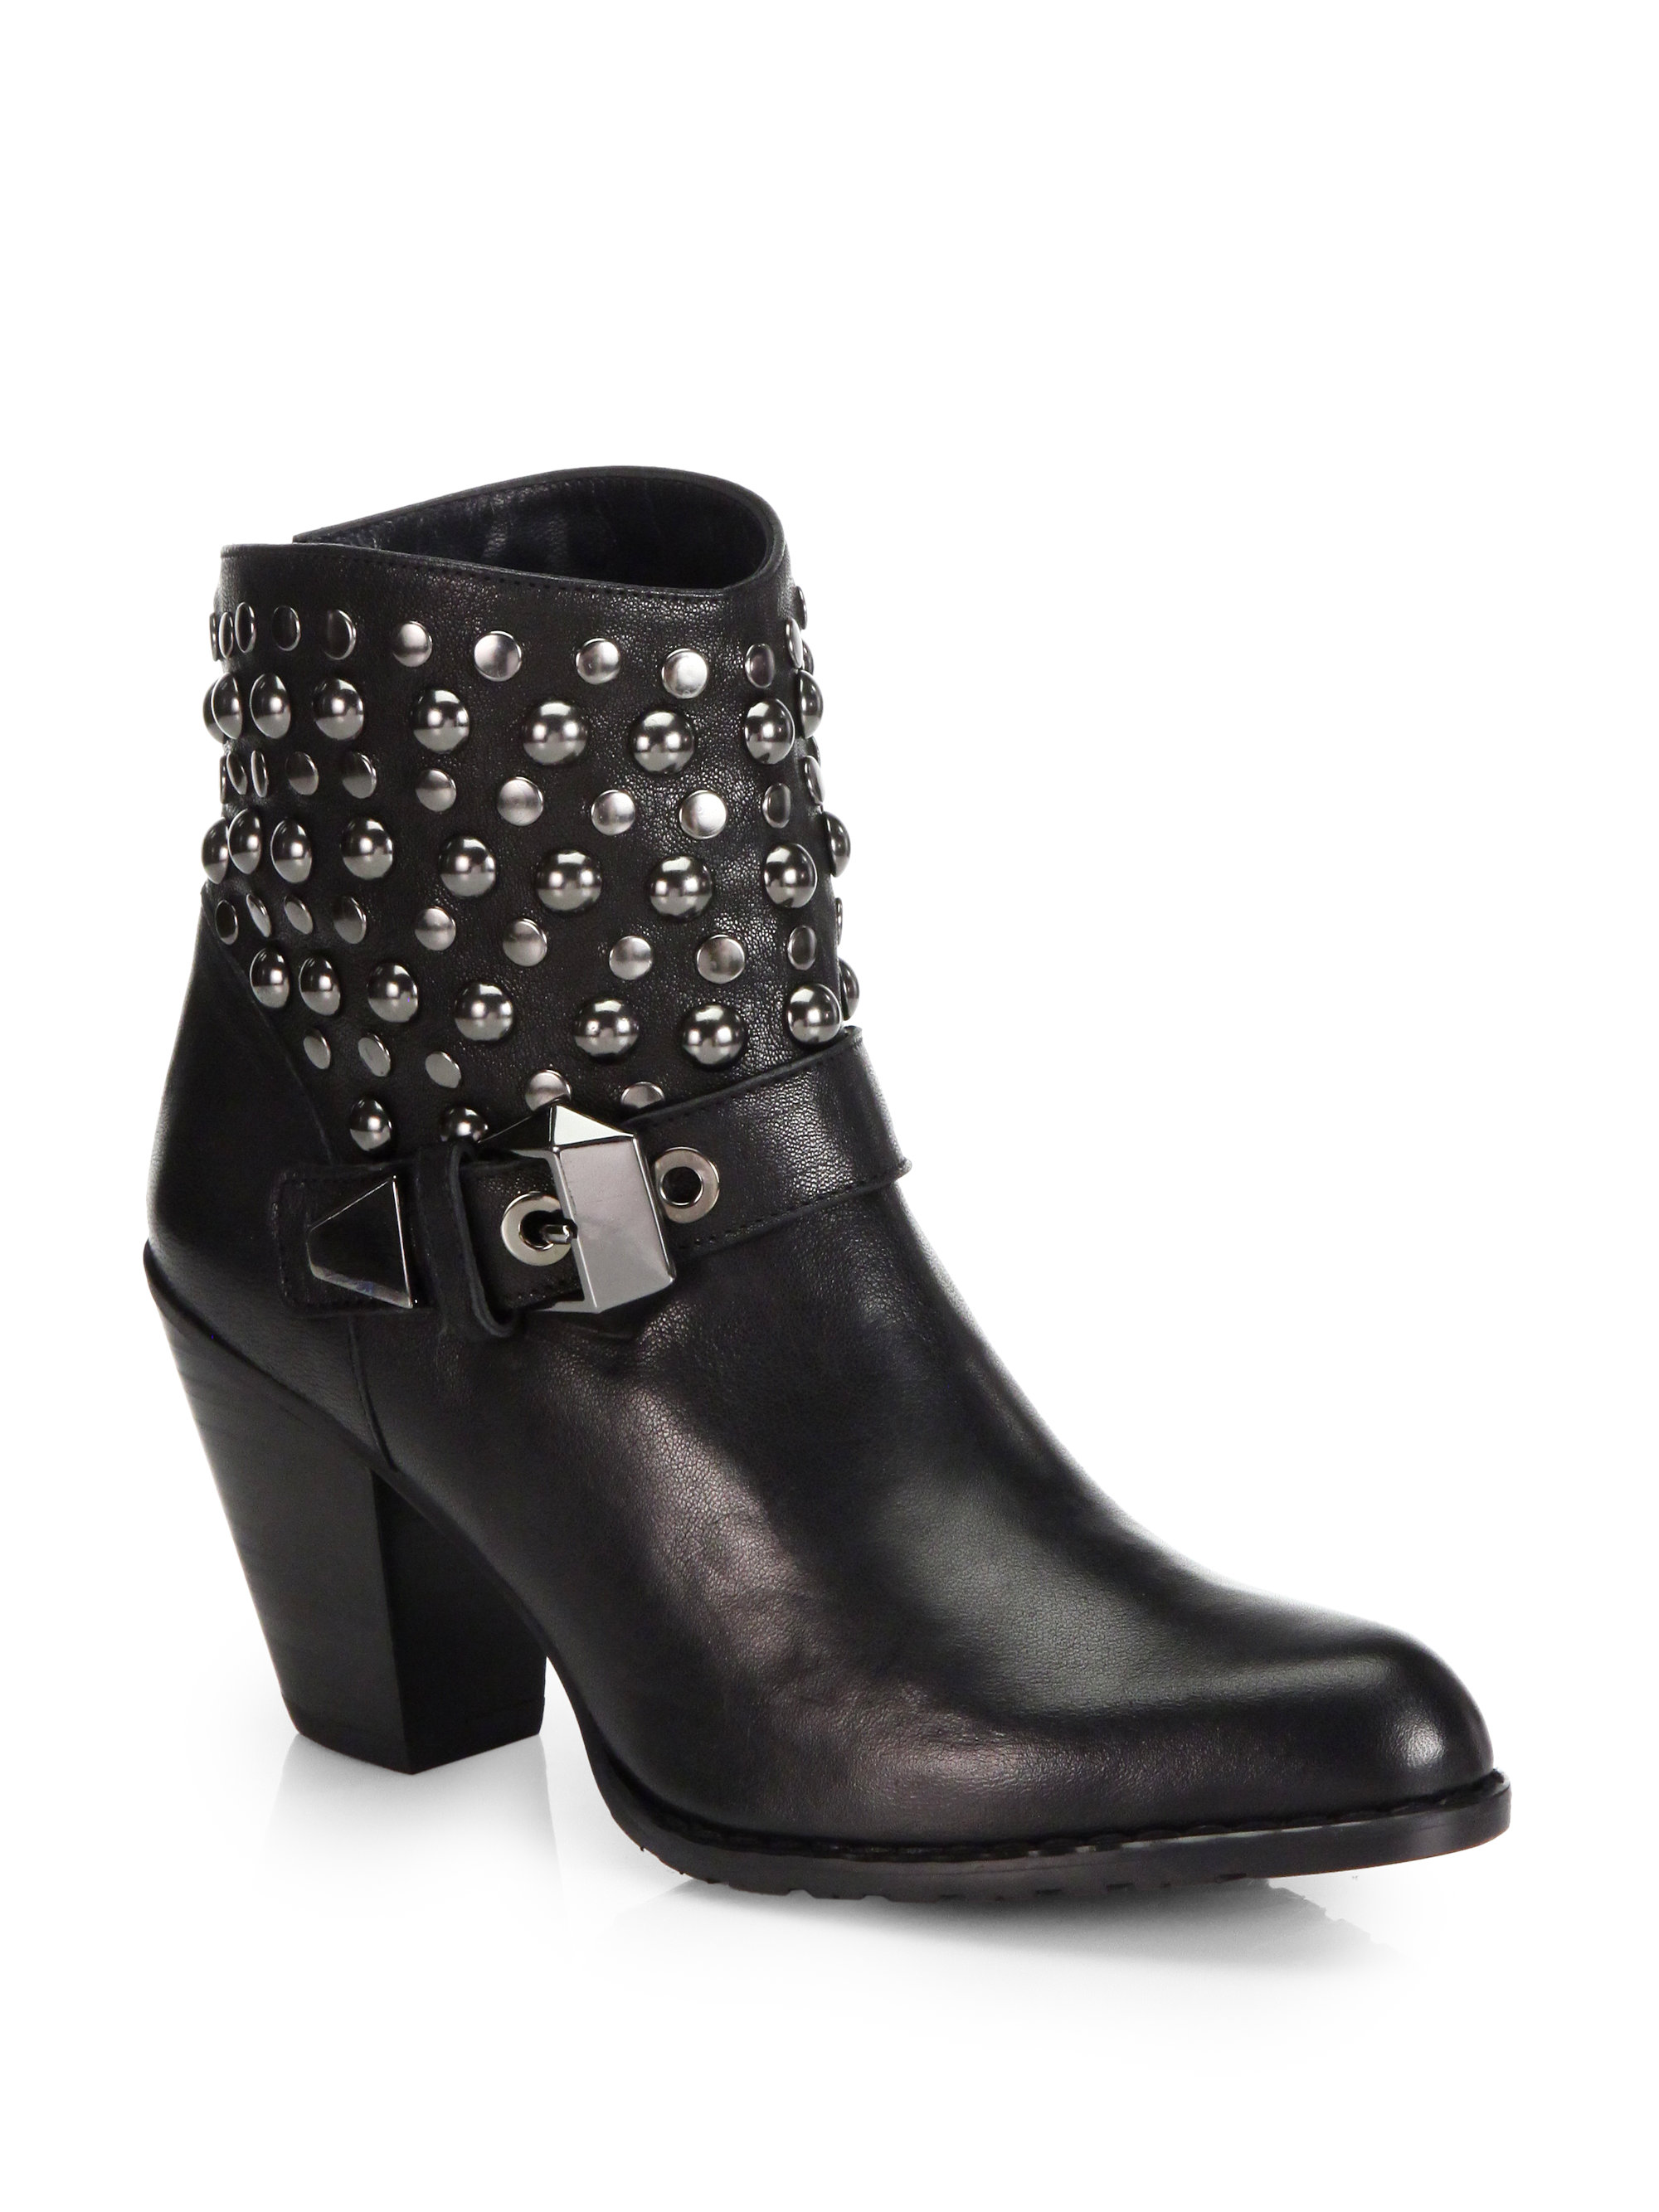 Stuart Weitzman City Slicker Studded Leather Ankle Boots in Black | Lyst